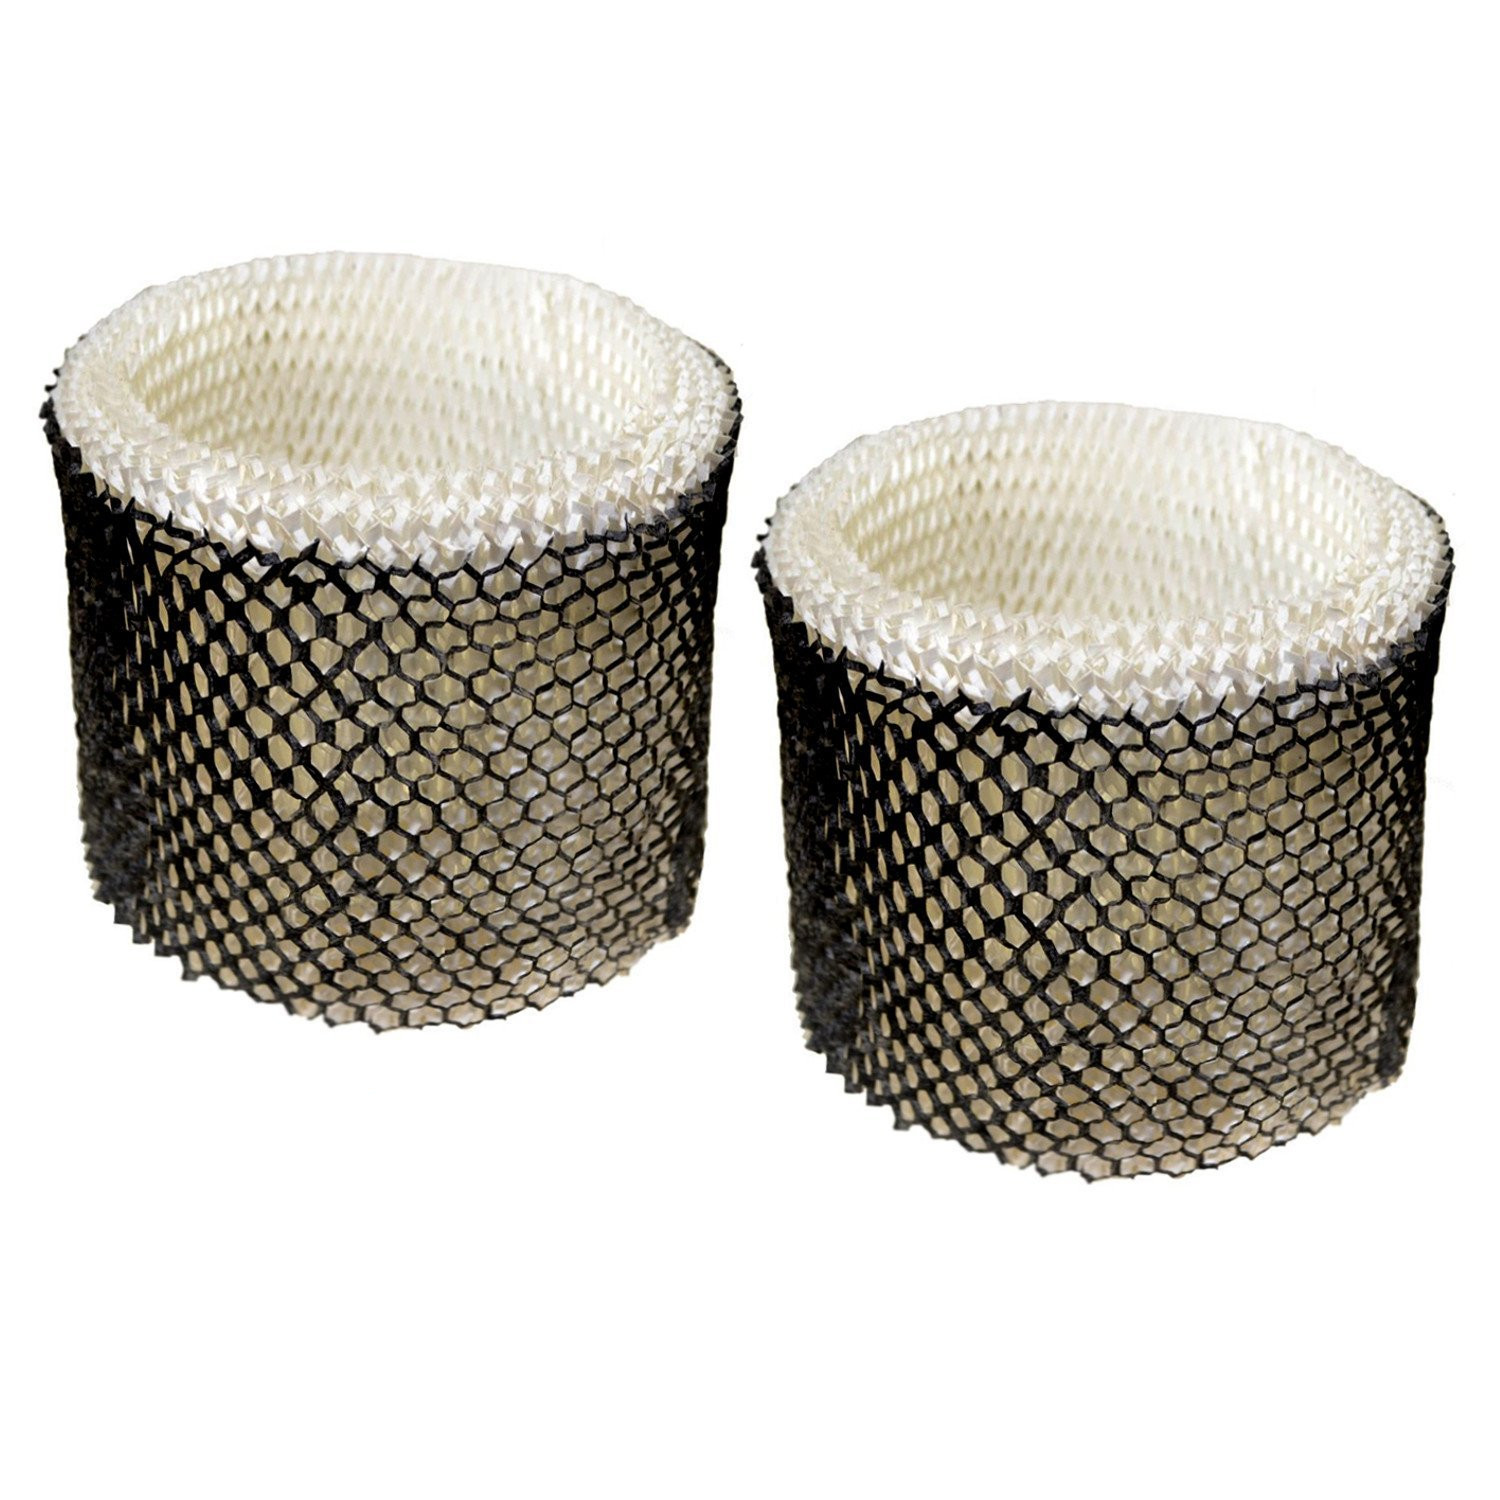 HQRP 2-pack Wick Filter for Graco 2H03 2H02 2H032 4.0 Gallon, TrueAir 05521 Humidifiers 